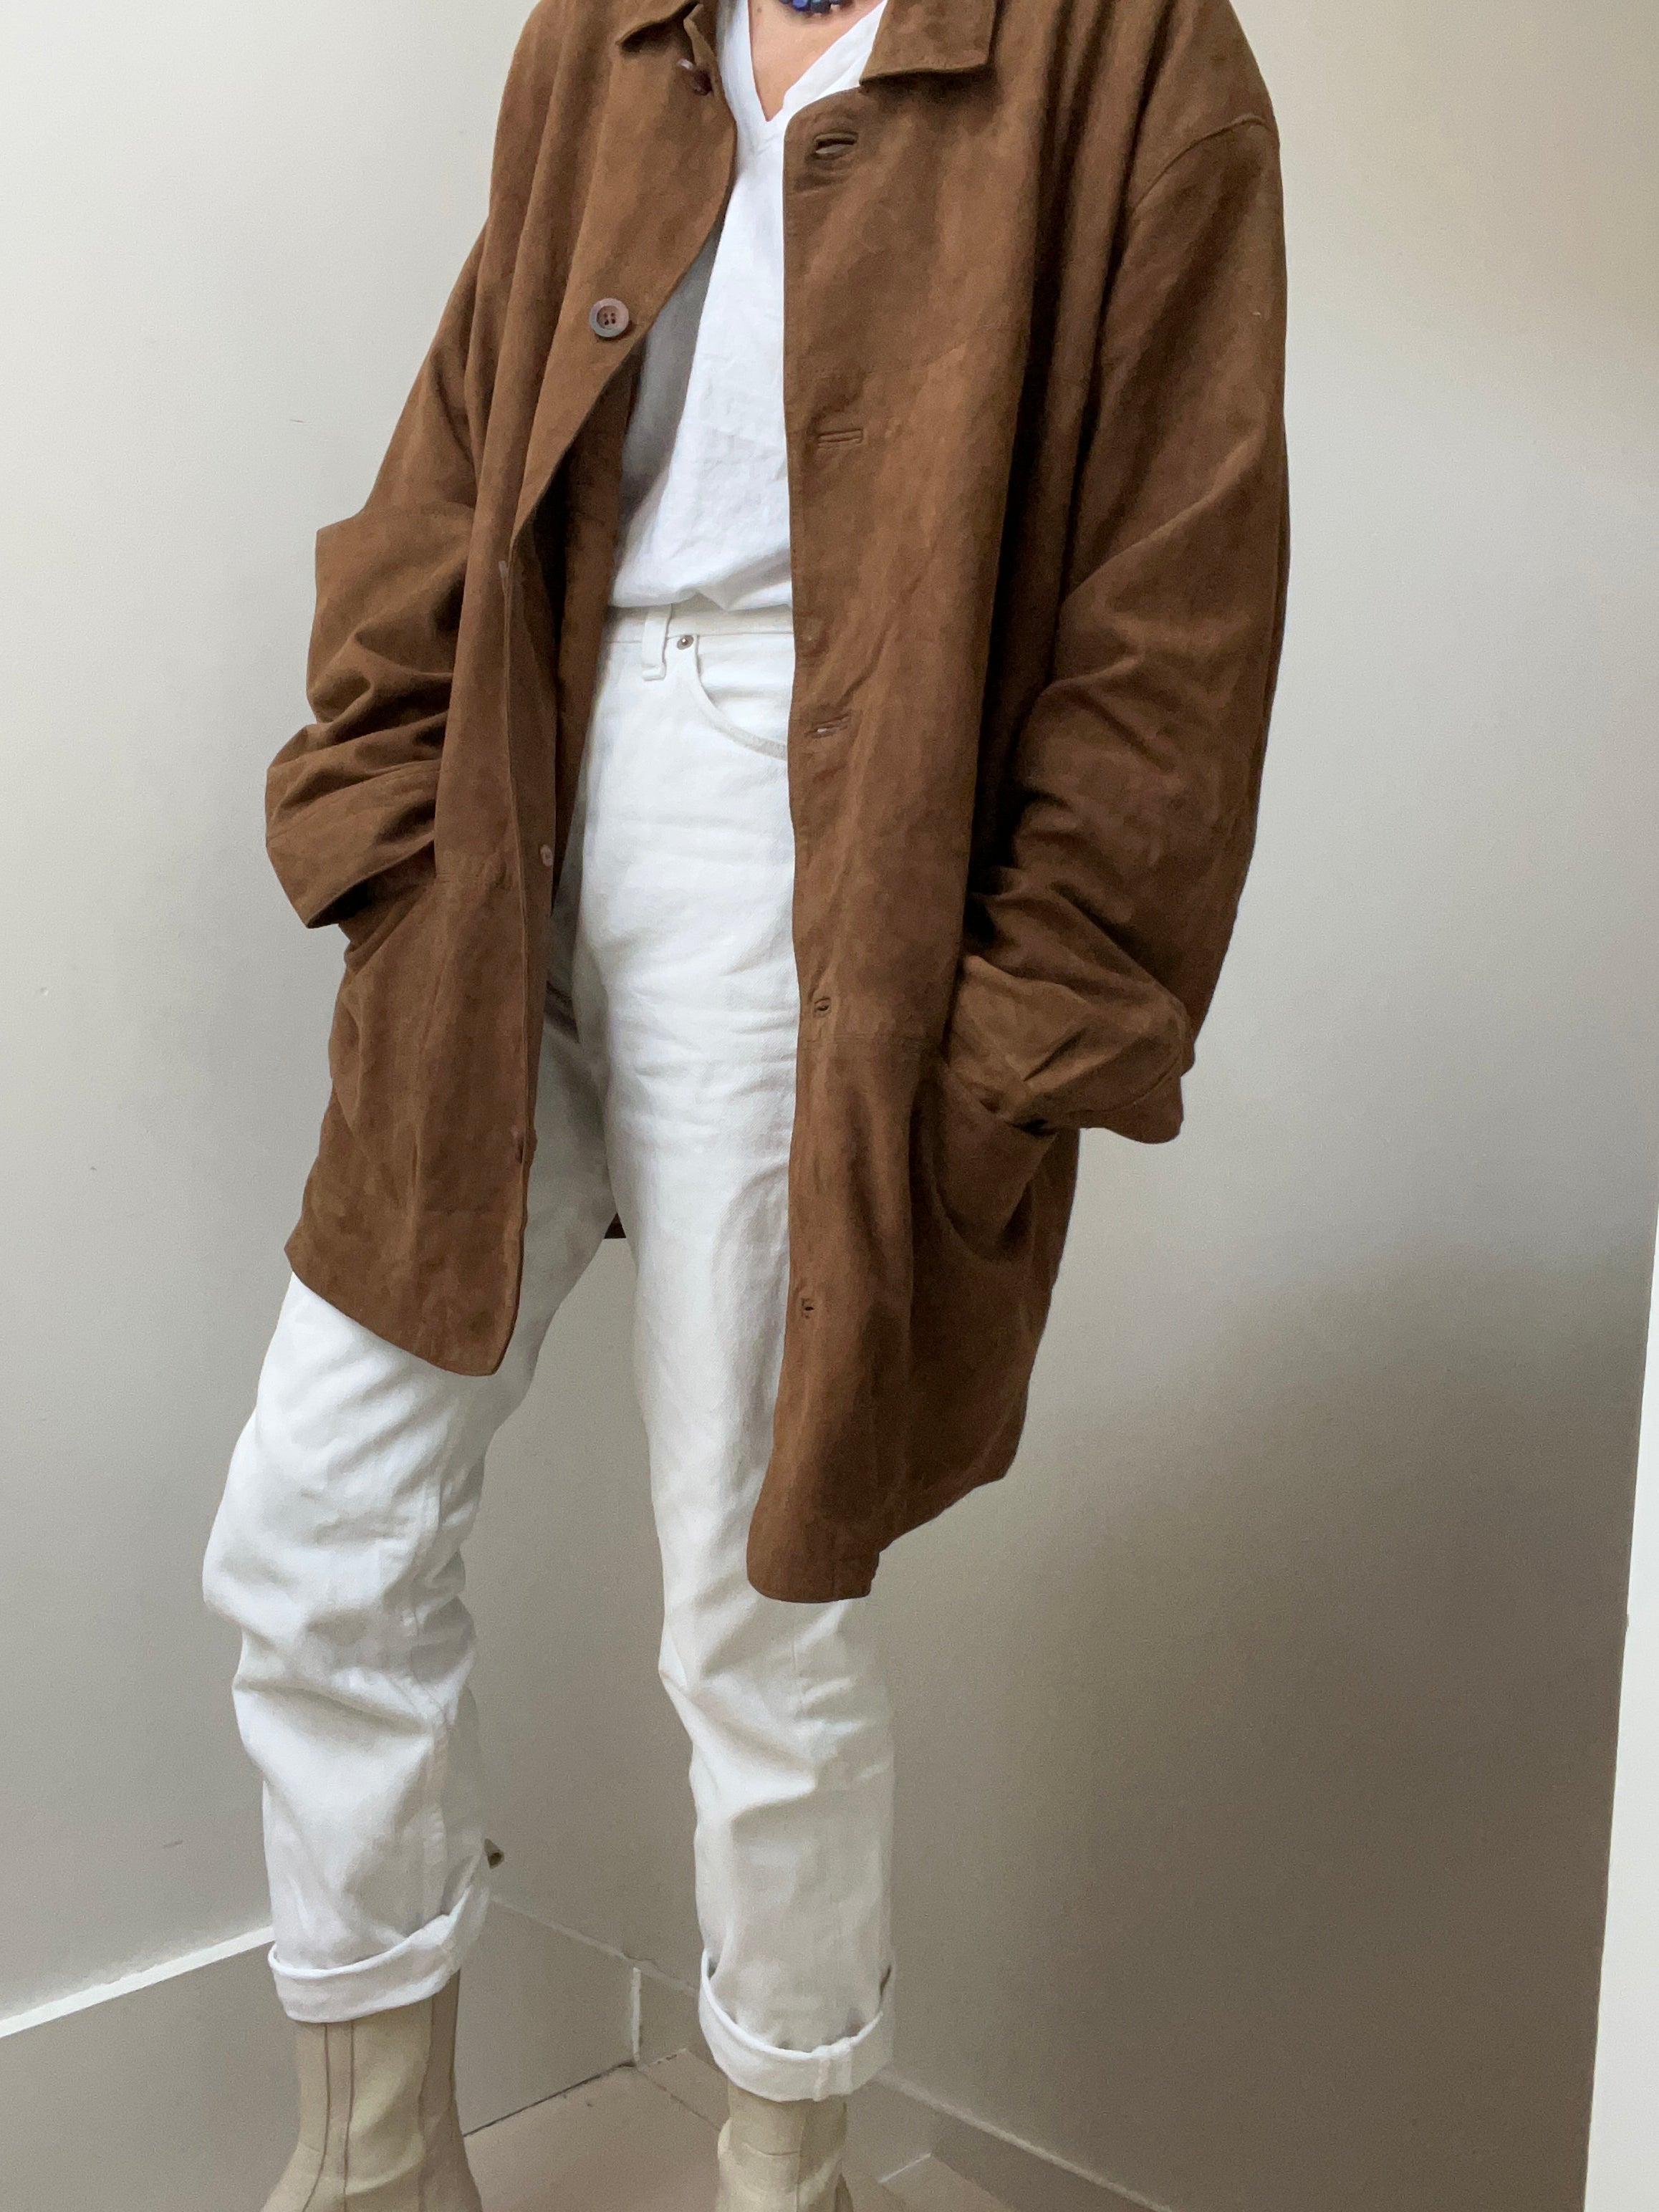 Not specified Jackets XLarge Chocolate Brown Oversized Suede Jacket